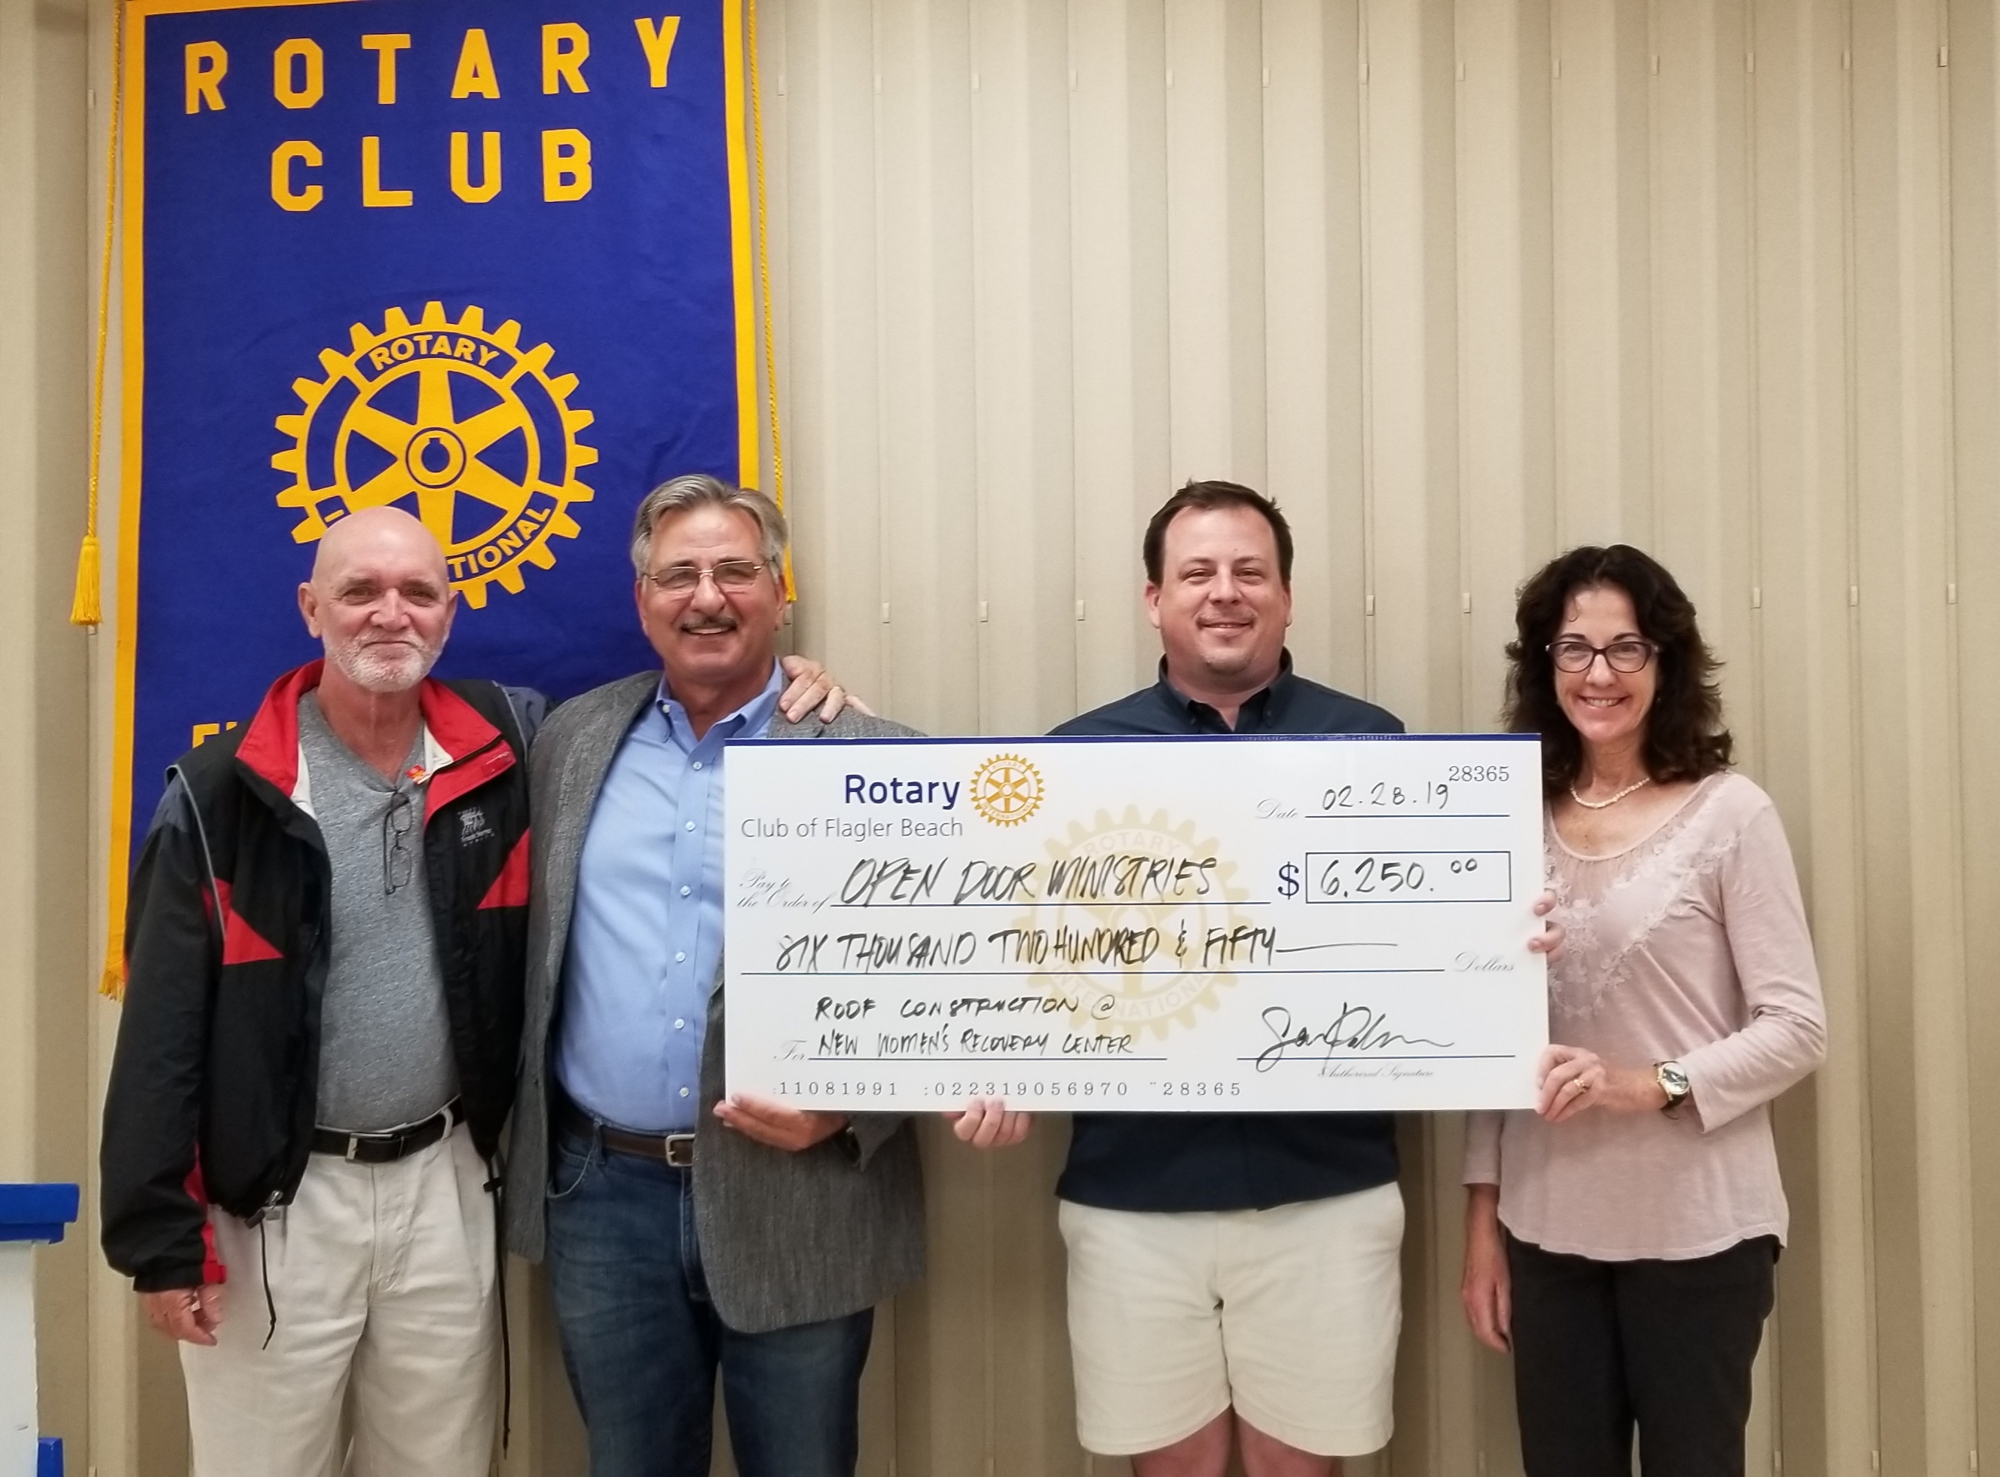 Art Macqueen, Pastor Charles Silano, Sean Palmer and Roseanne Stocker at the Rotary Club of Flagler Beach check presentation. Photo courtesy of Marketing2Go